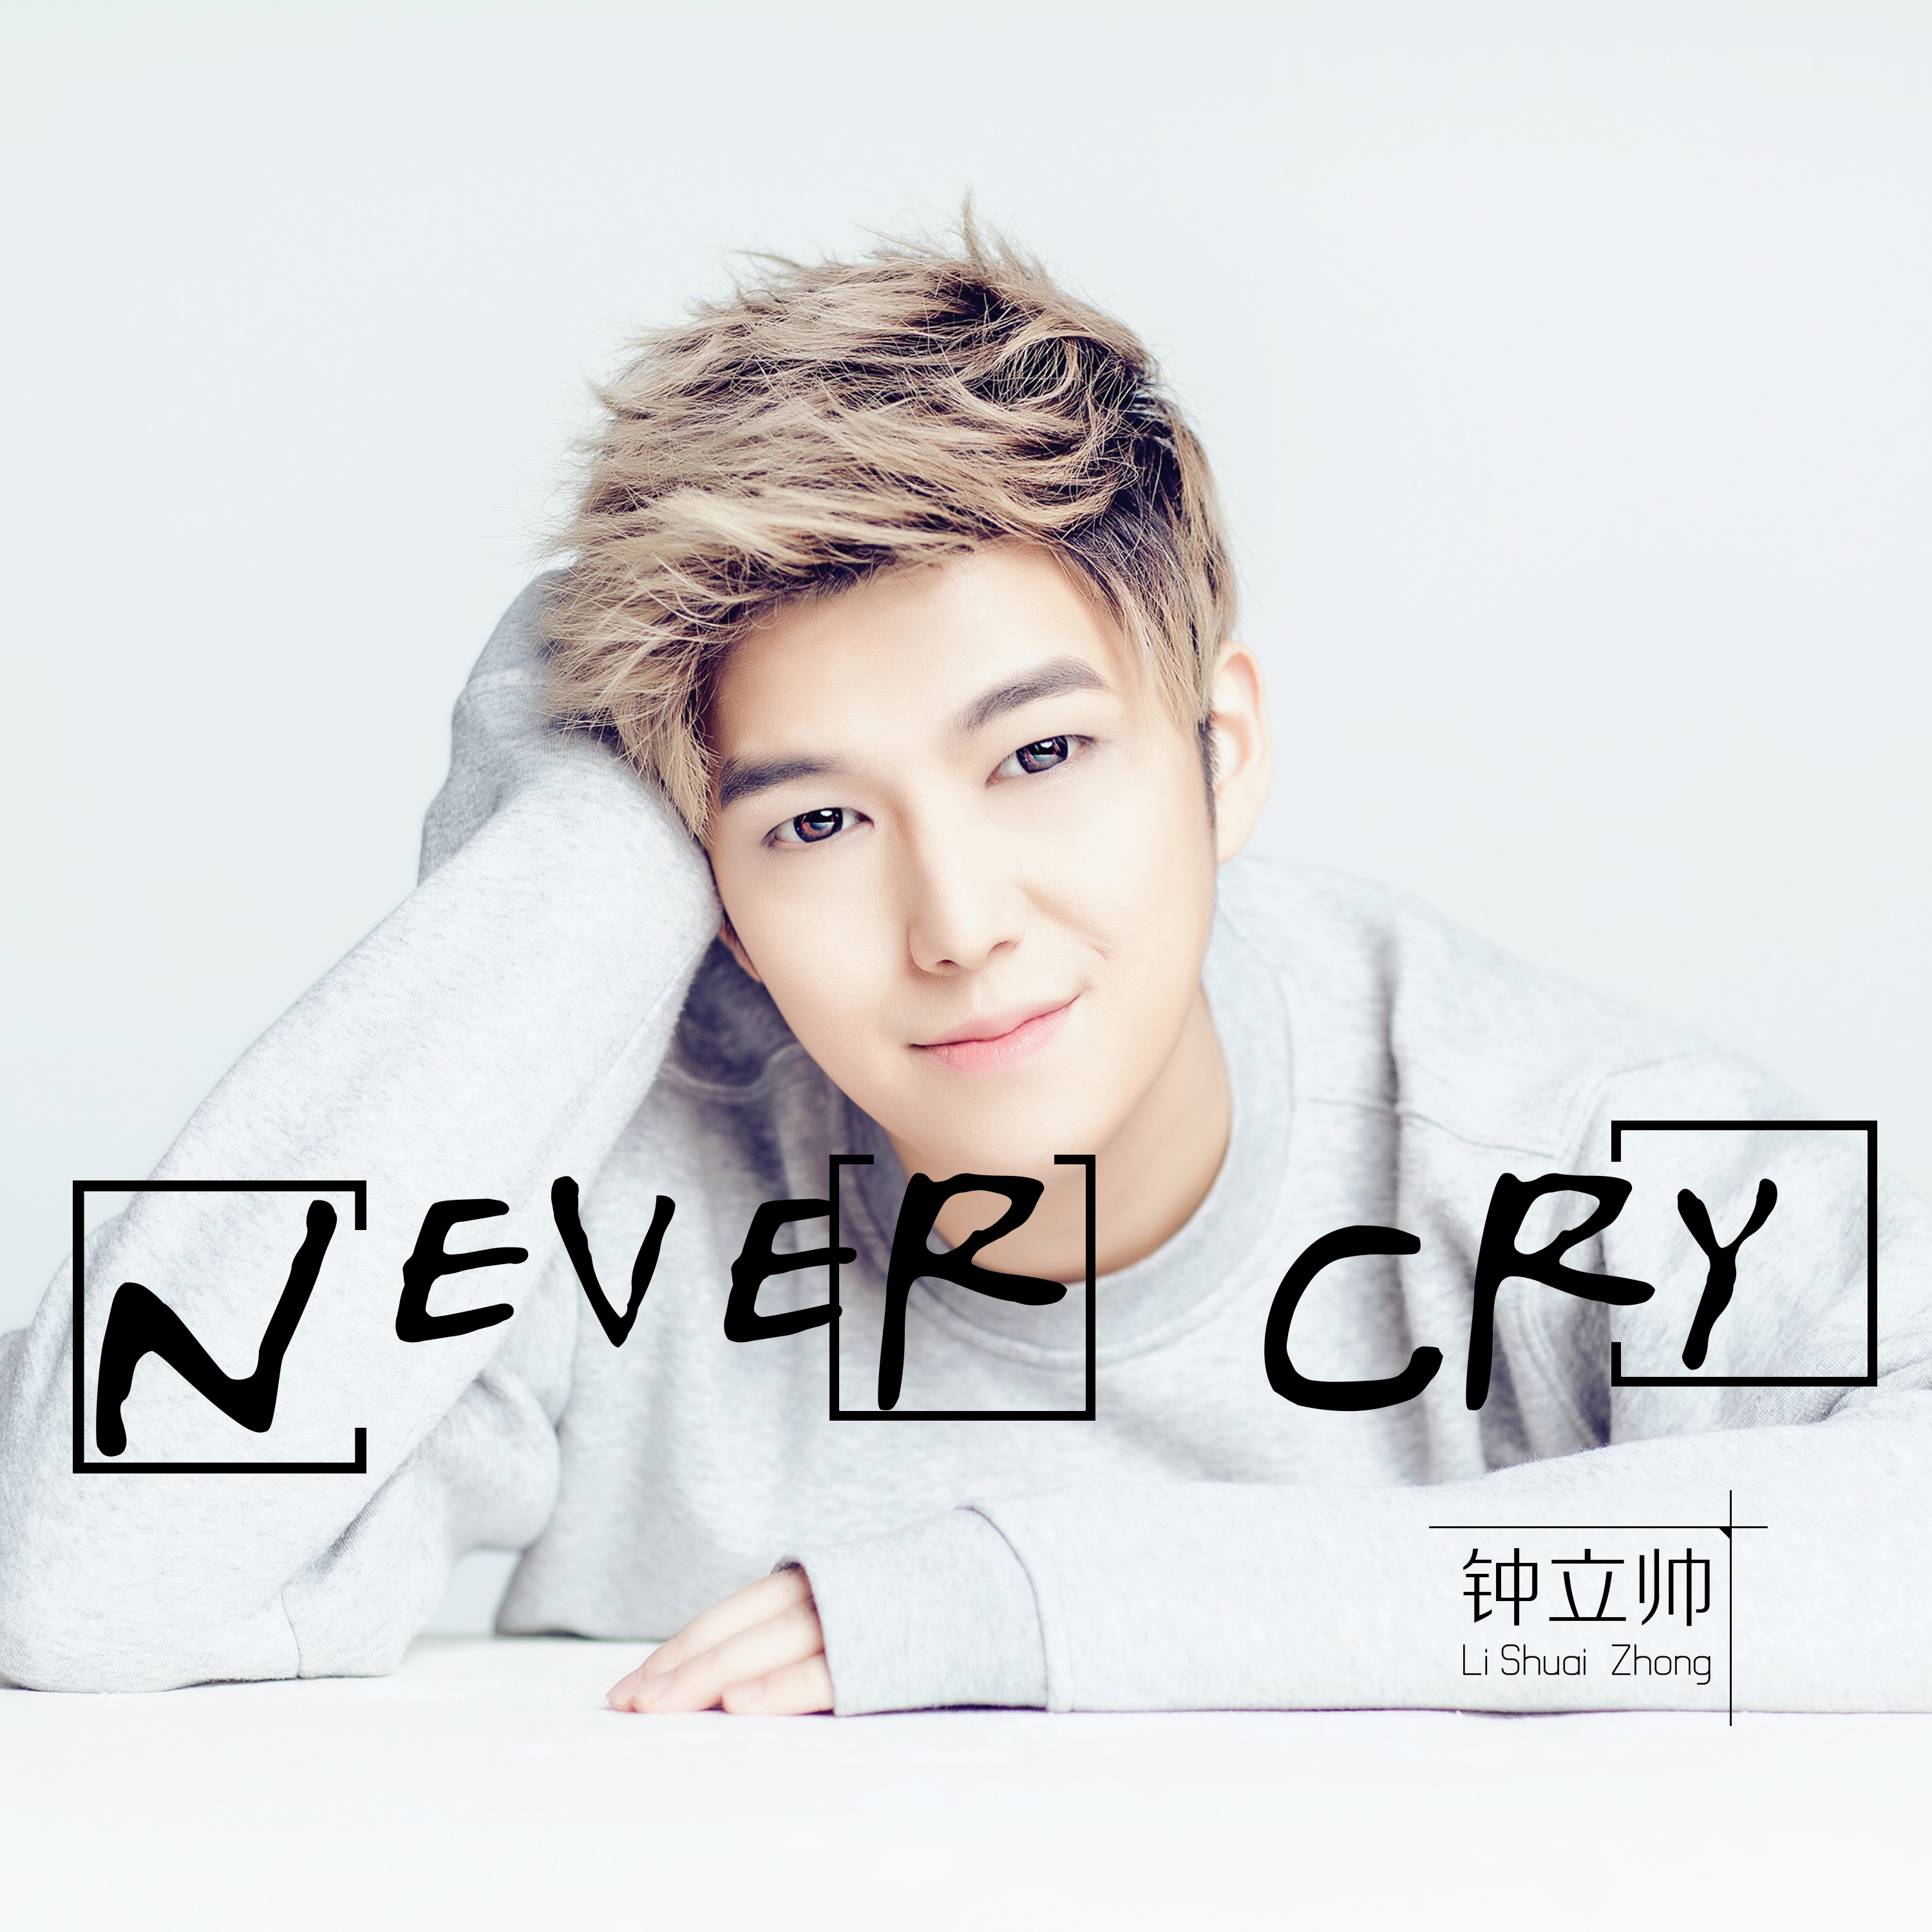 never cry